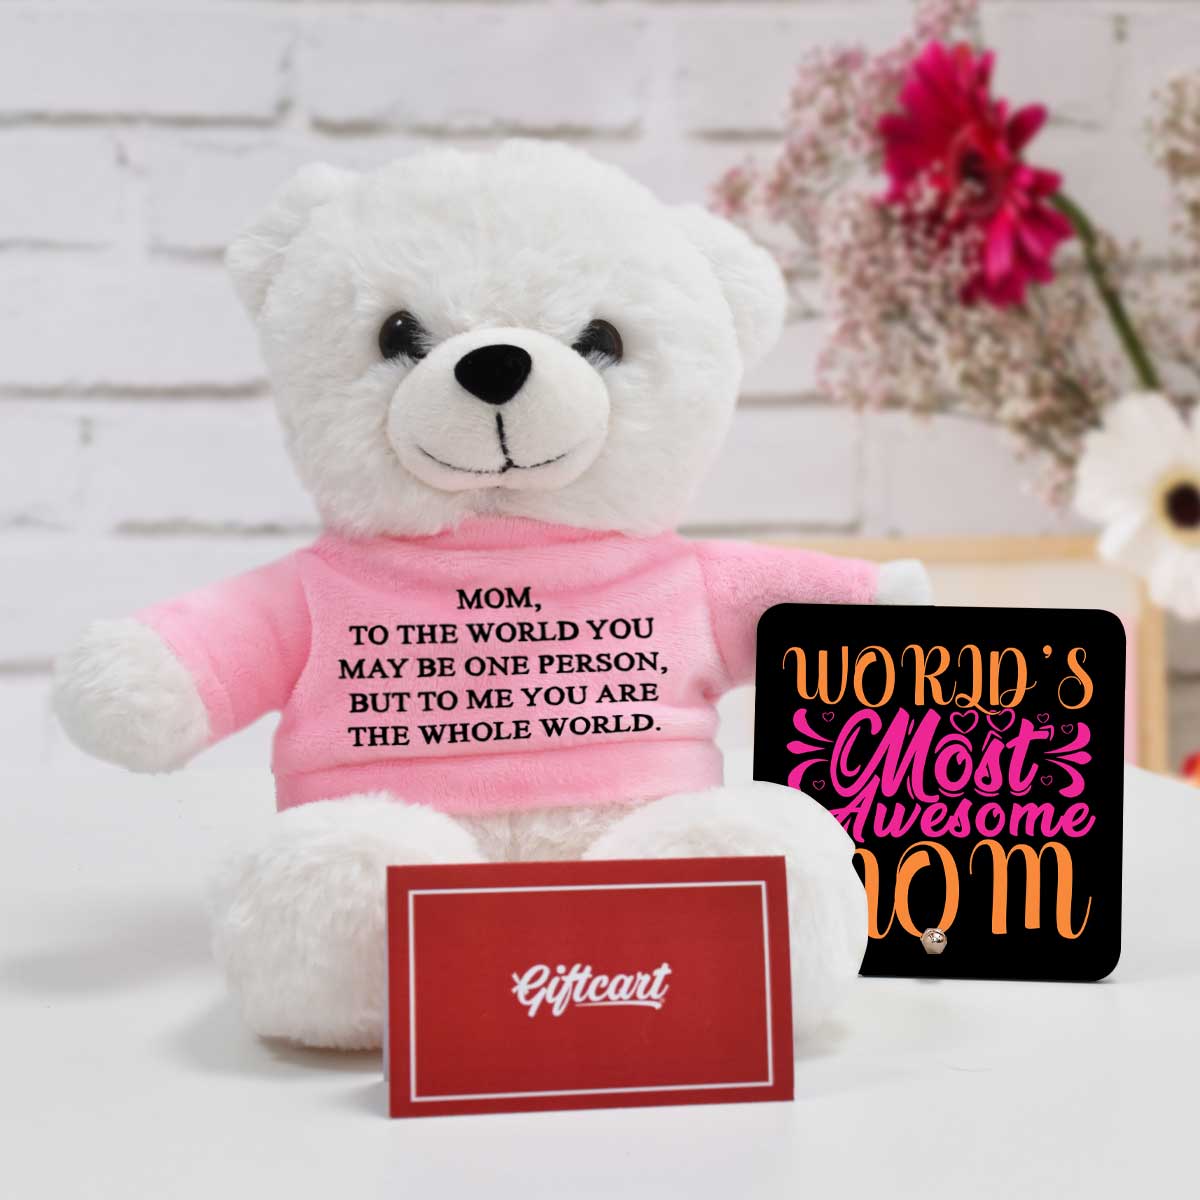 Table Top with Cute Teddy with Card set of 3 for Mom